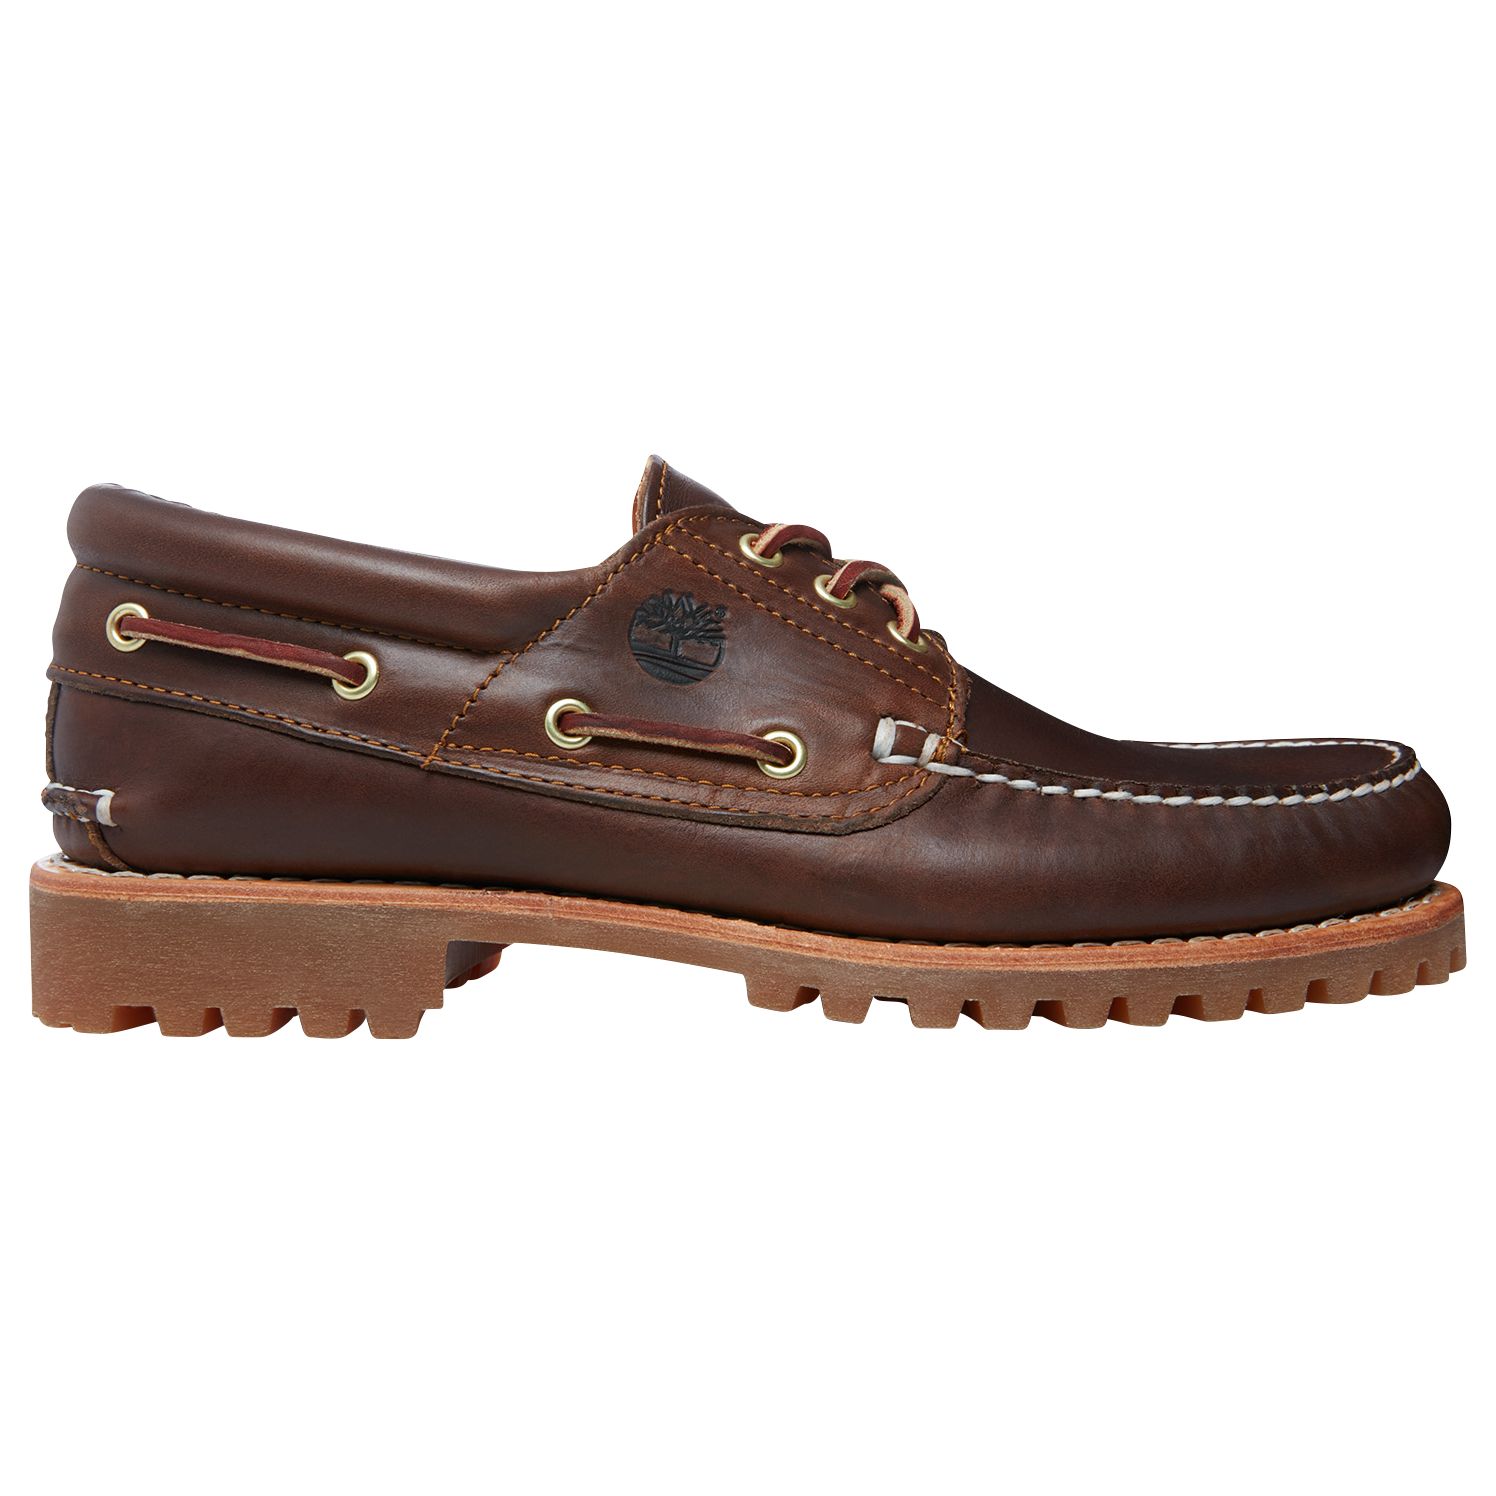 Timberland Handsewn Boat Shoes, Brown 